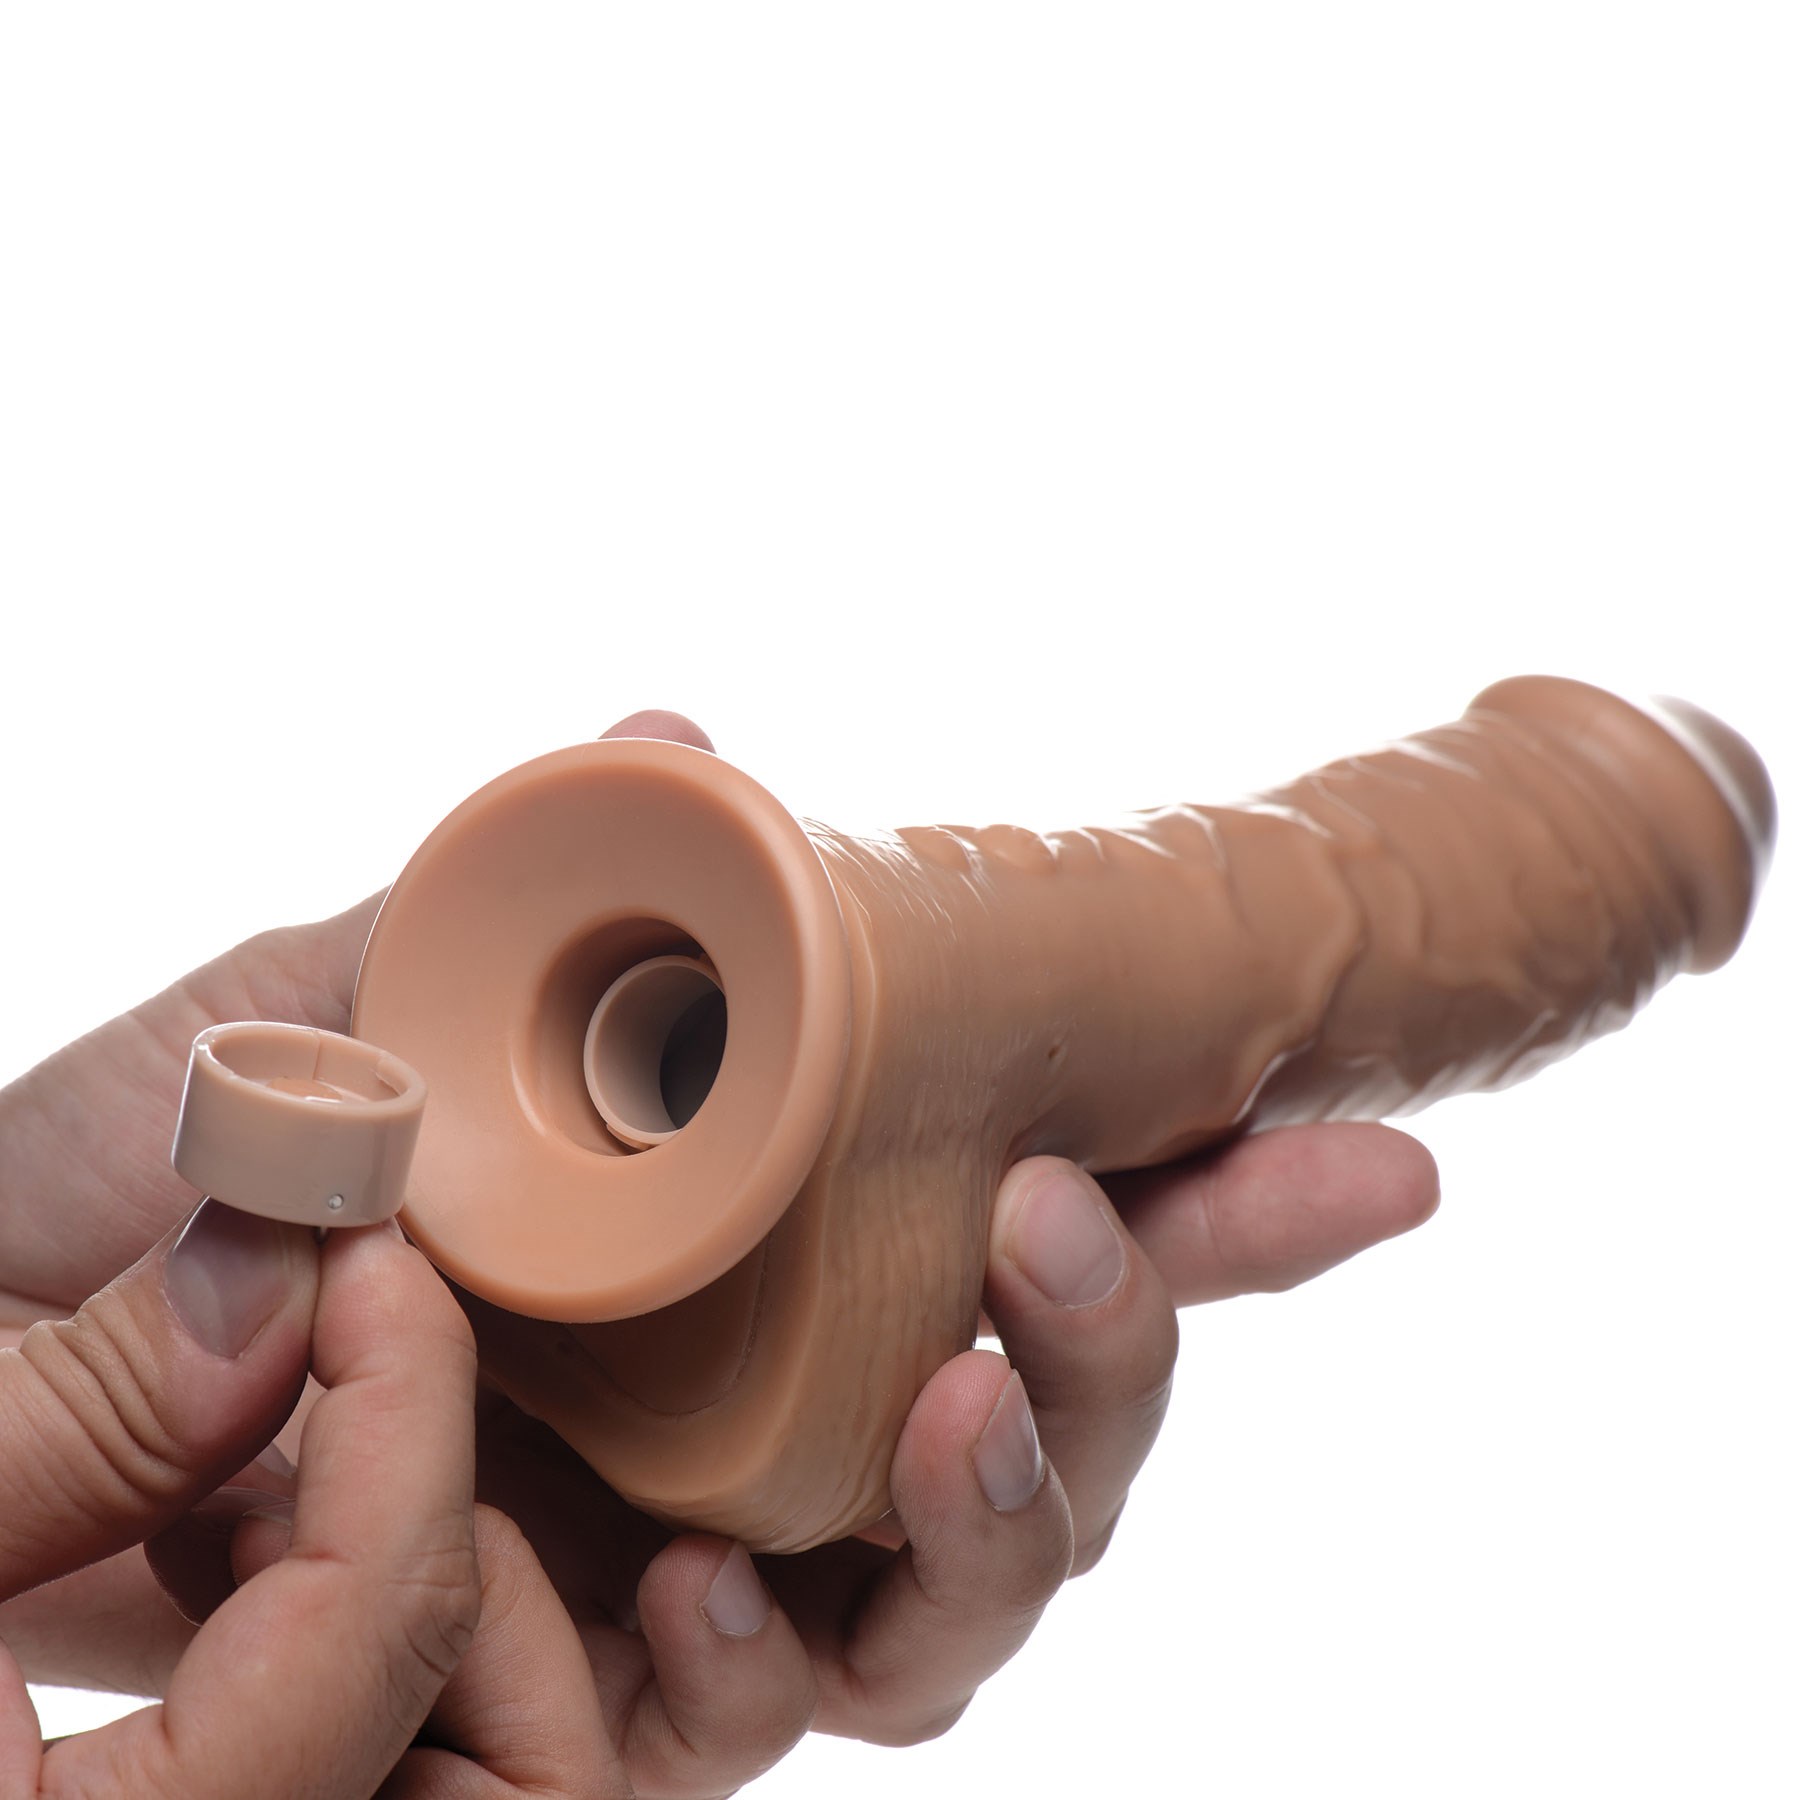 Loadz Vibrating Squirting Dildo brown version with hand removing cap from end to fill with liquid